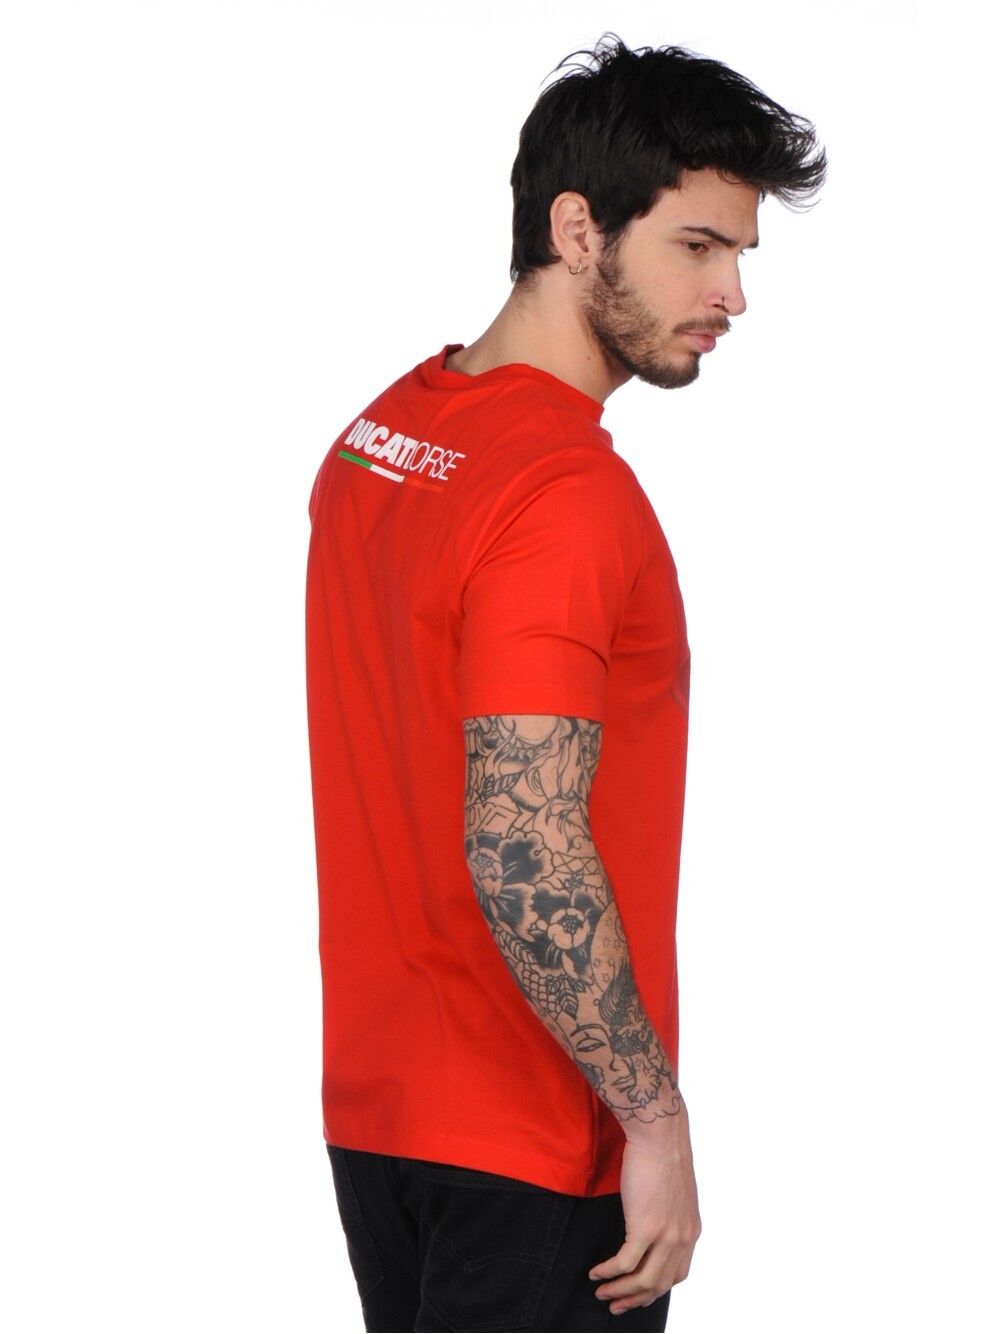 Official Ducati Corse Official Man's T'shirt - 17 36001